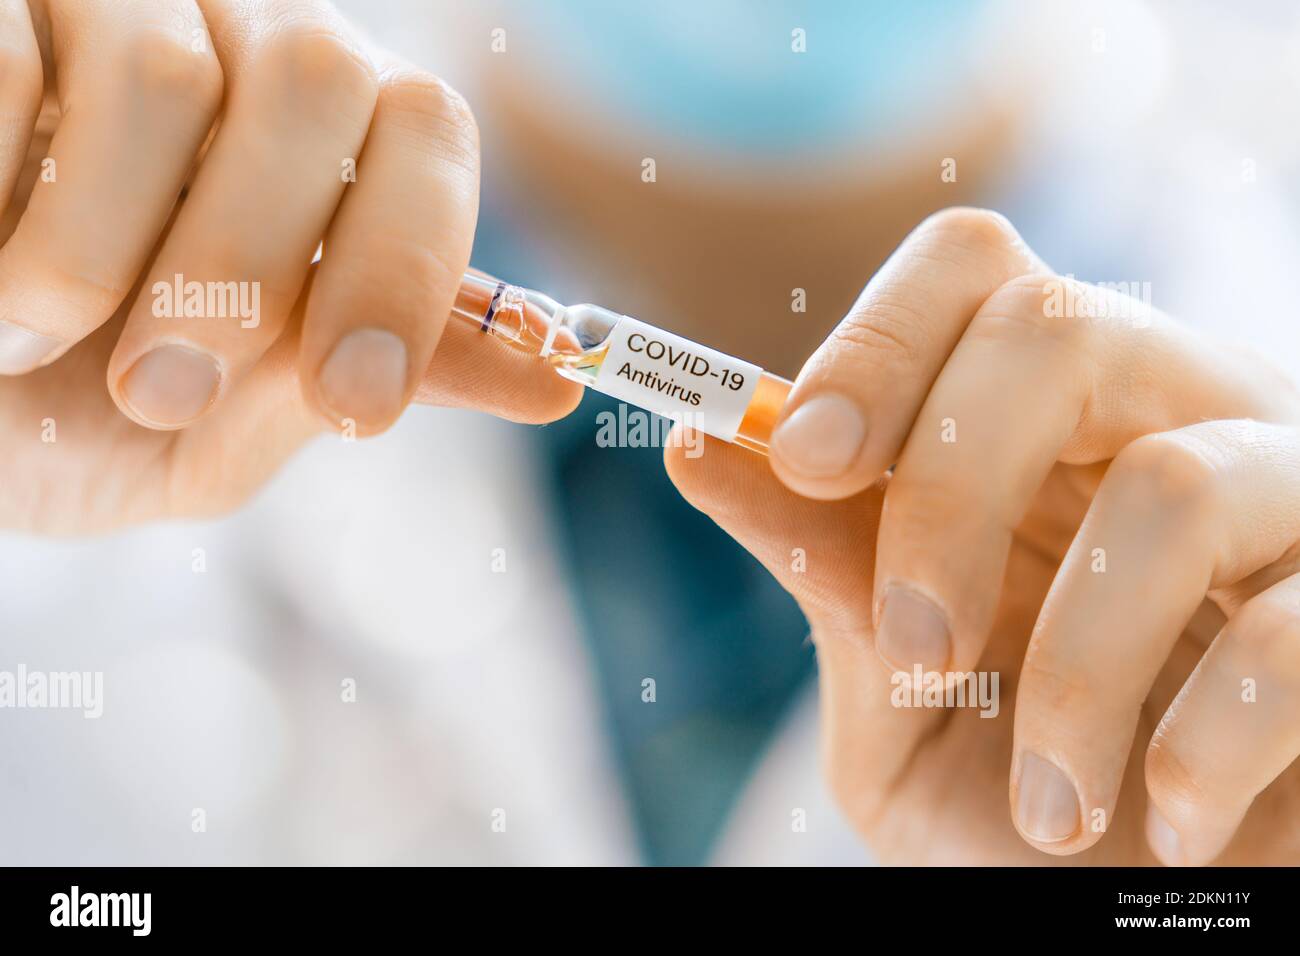 Medical doctor or laborant holding tube with anti Coronavirus vaccine. Concept of Covid-19 treatment and prevention. Stock Photo